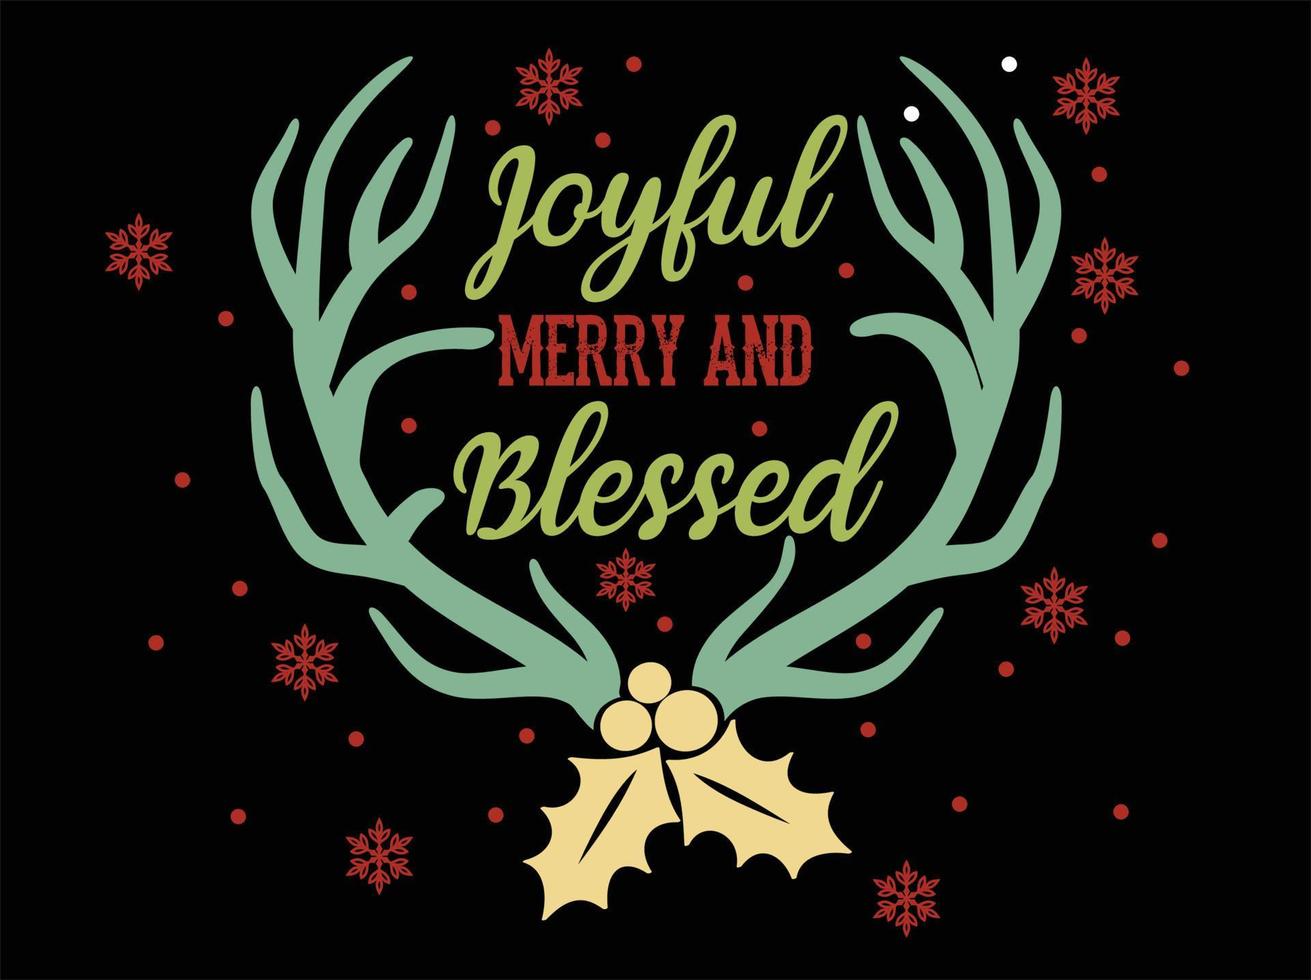 Joyful Merry and Blessed 04 Merry Christmas and Happy Holidays Typography set vector